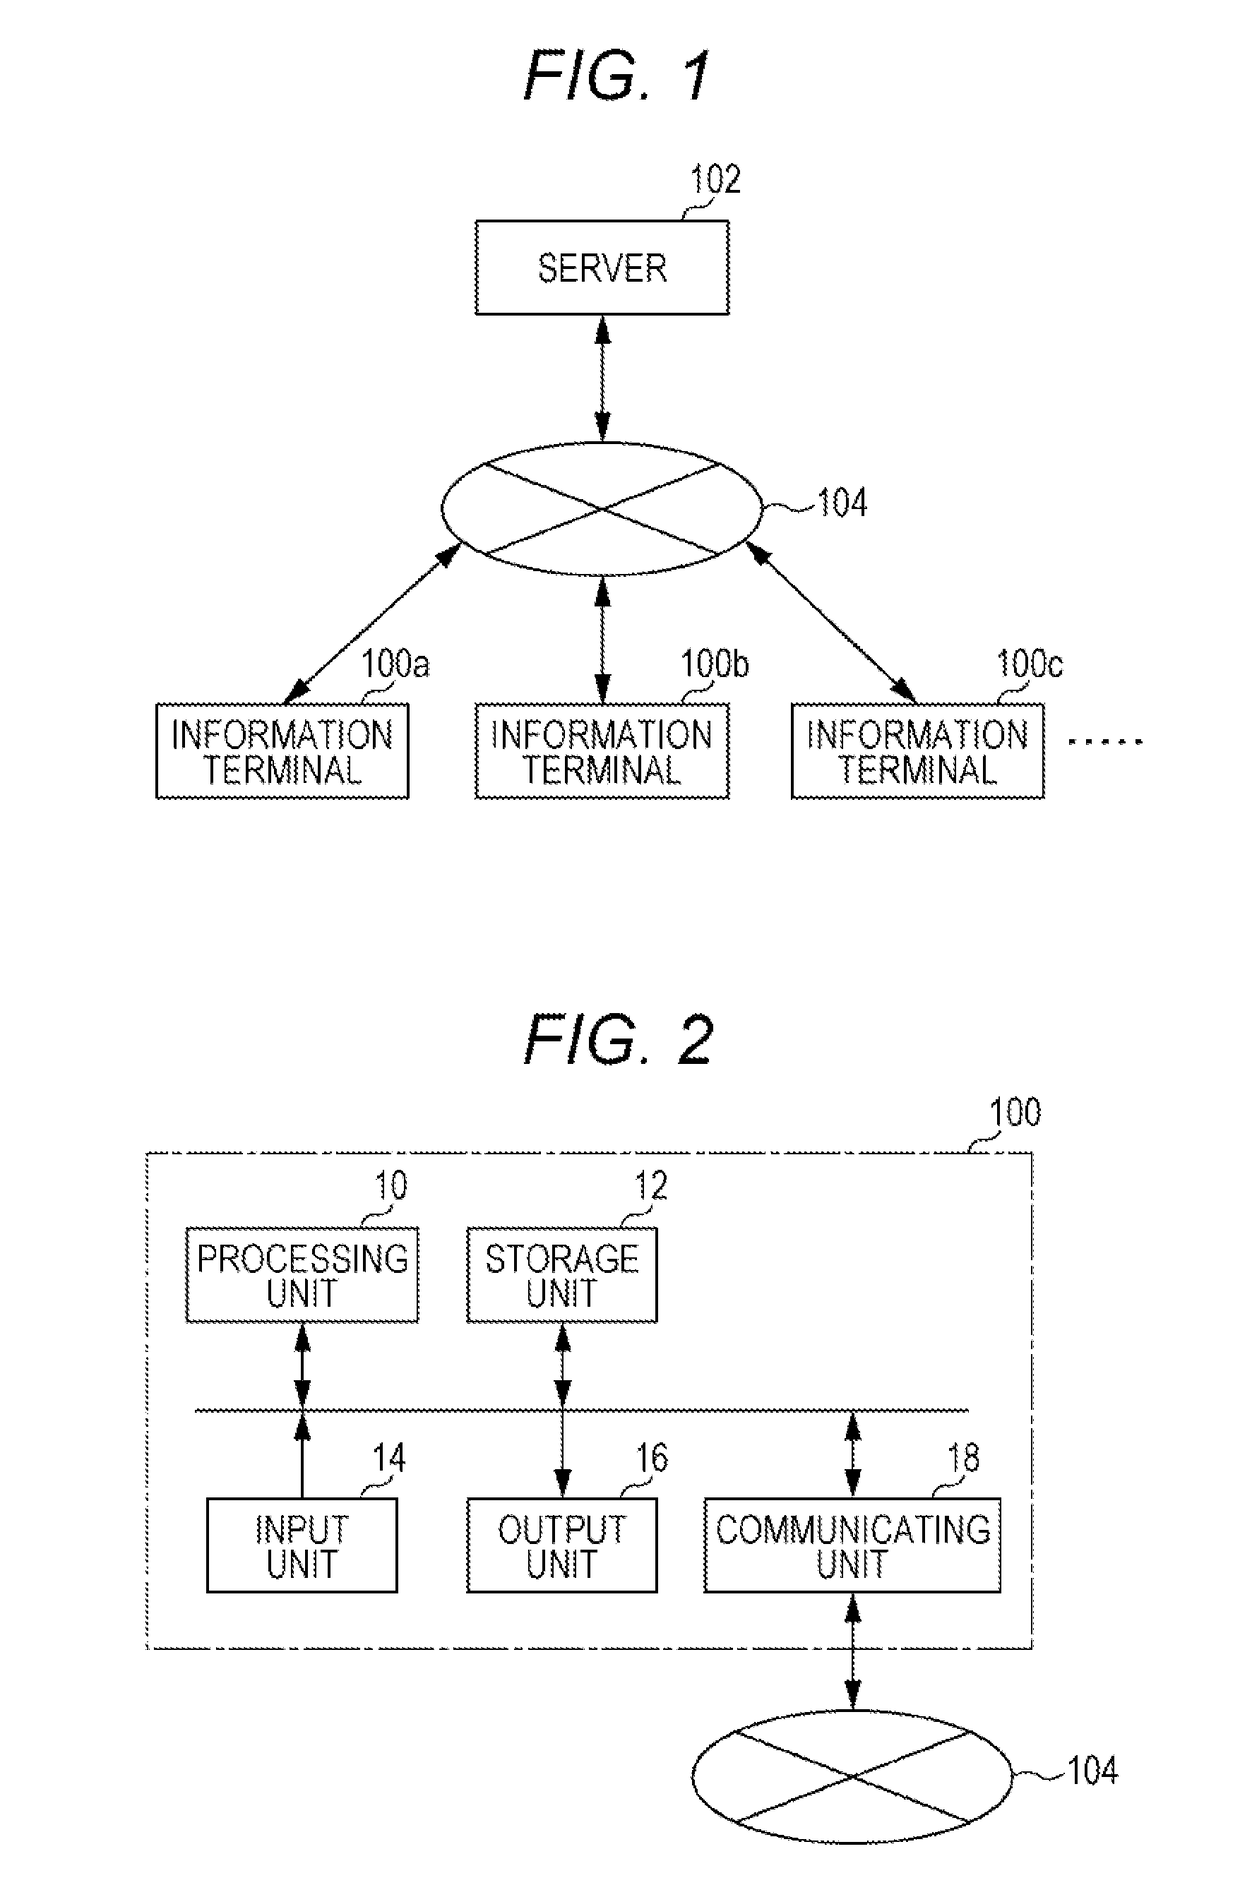 Electronic game providing device and non-transitory computer-readable storage medium storing electronic game program